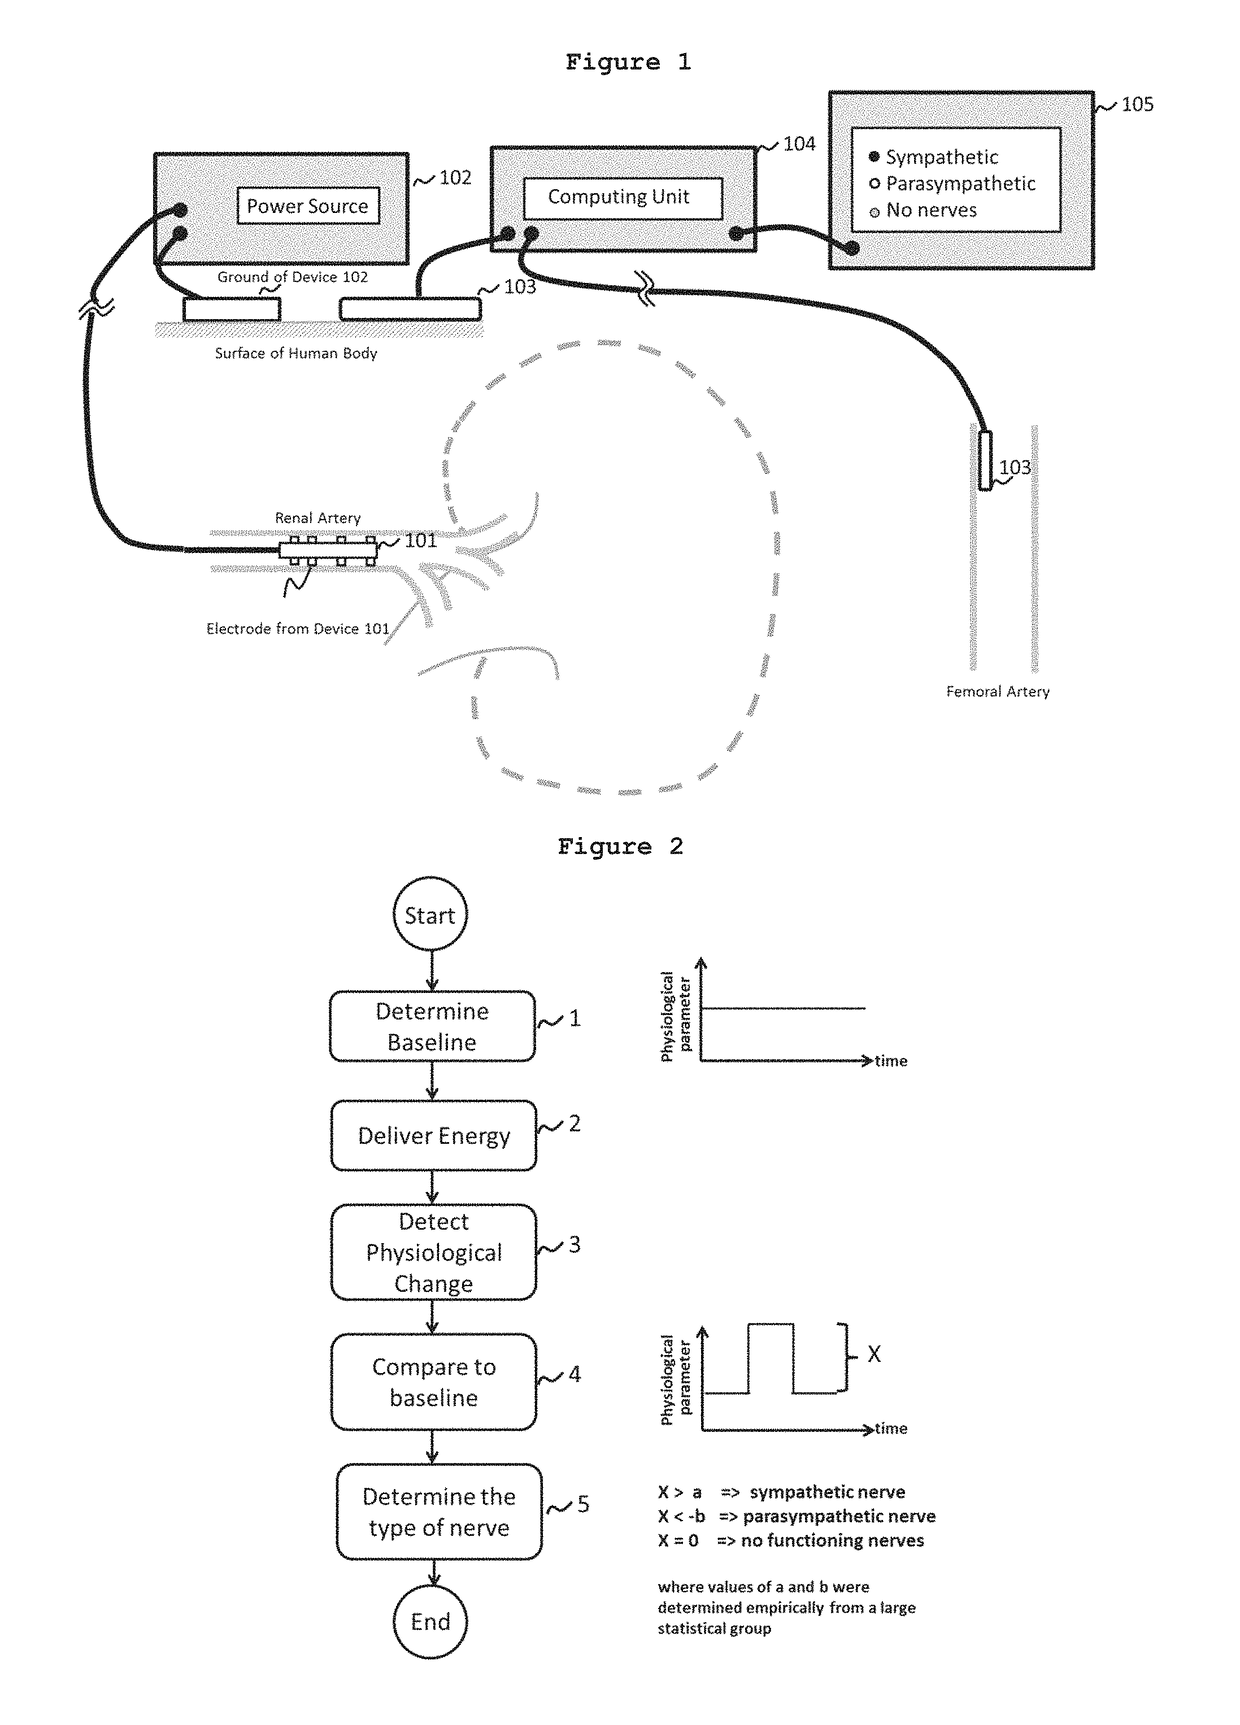 System and method for mapping the functional nerves innervating the wall of arteries, 3-D mapping and catheters for same